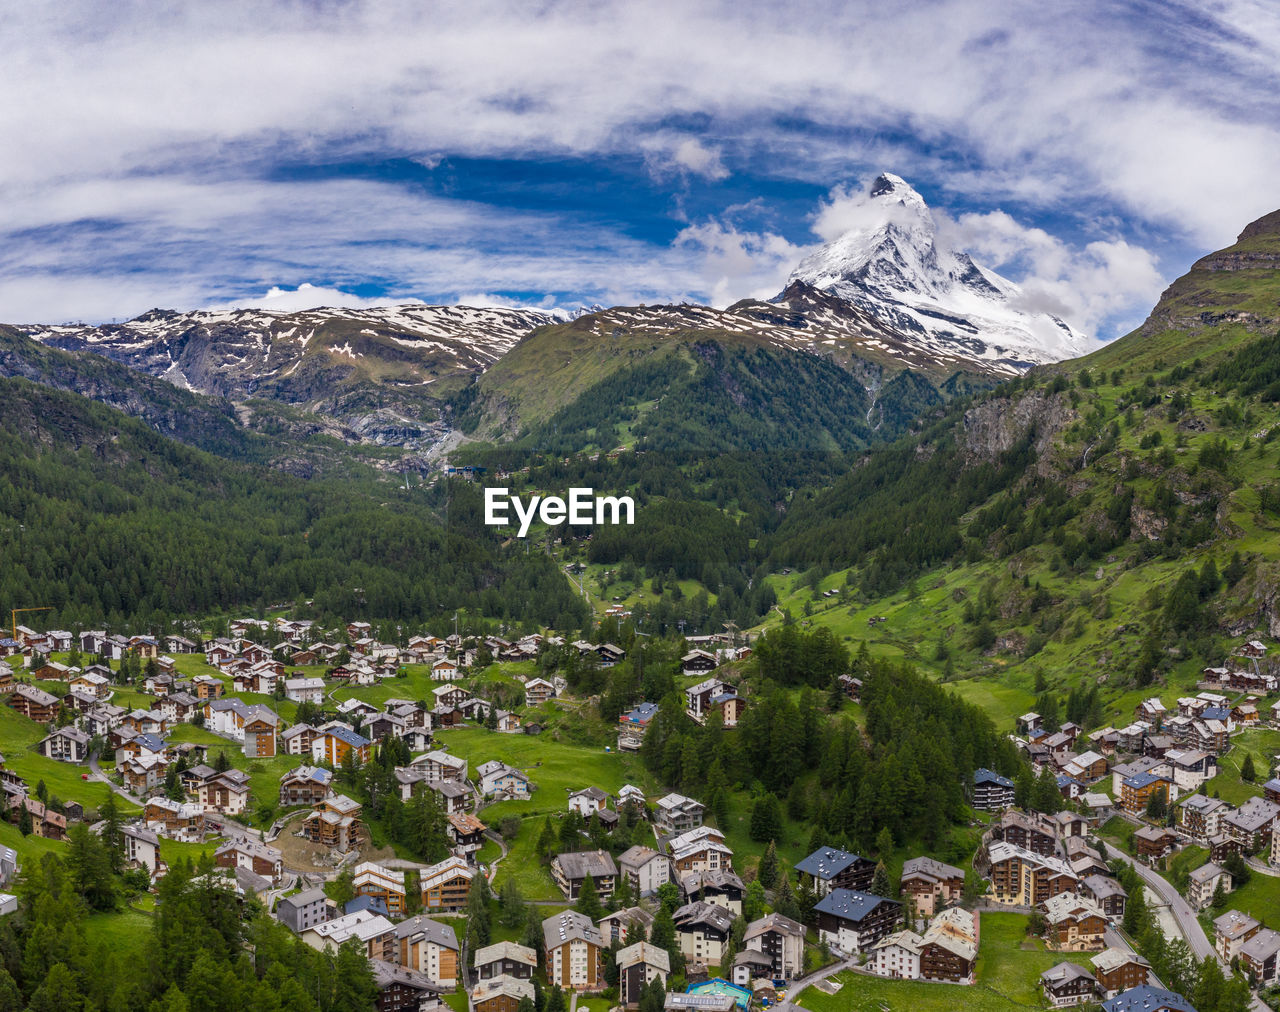 PANORAMIC VIEW OF TOWNSCAPE AGAINST MOUNTAIN